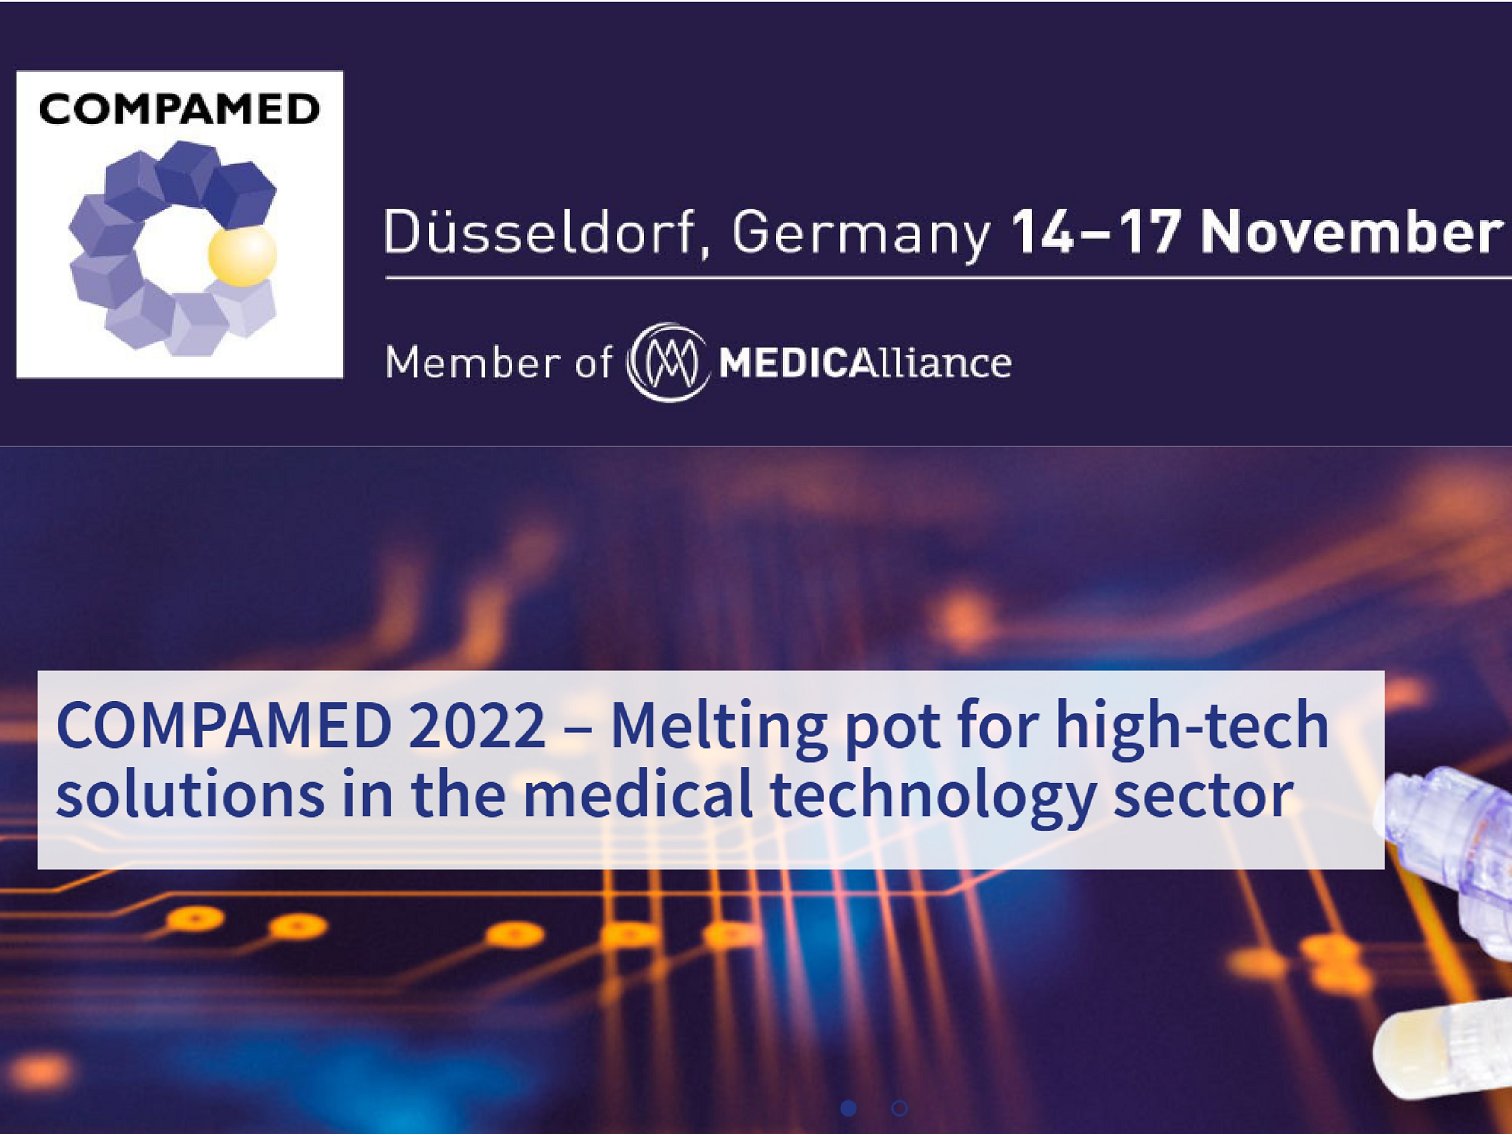 Boreasa will be present at COMPAMED (Dusseldorf, Germany 14-17 November 2022), Booth No. is 8B R20-3